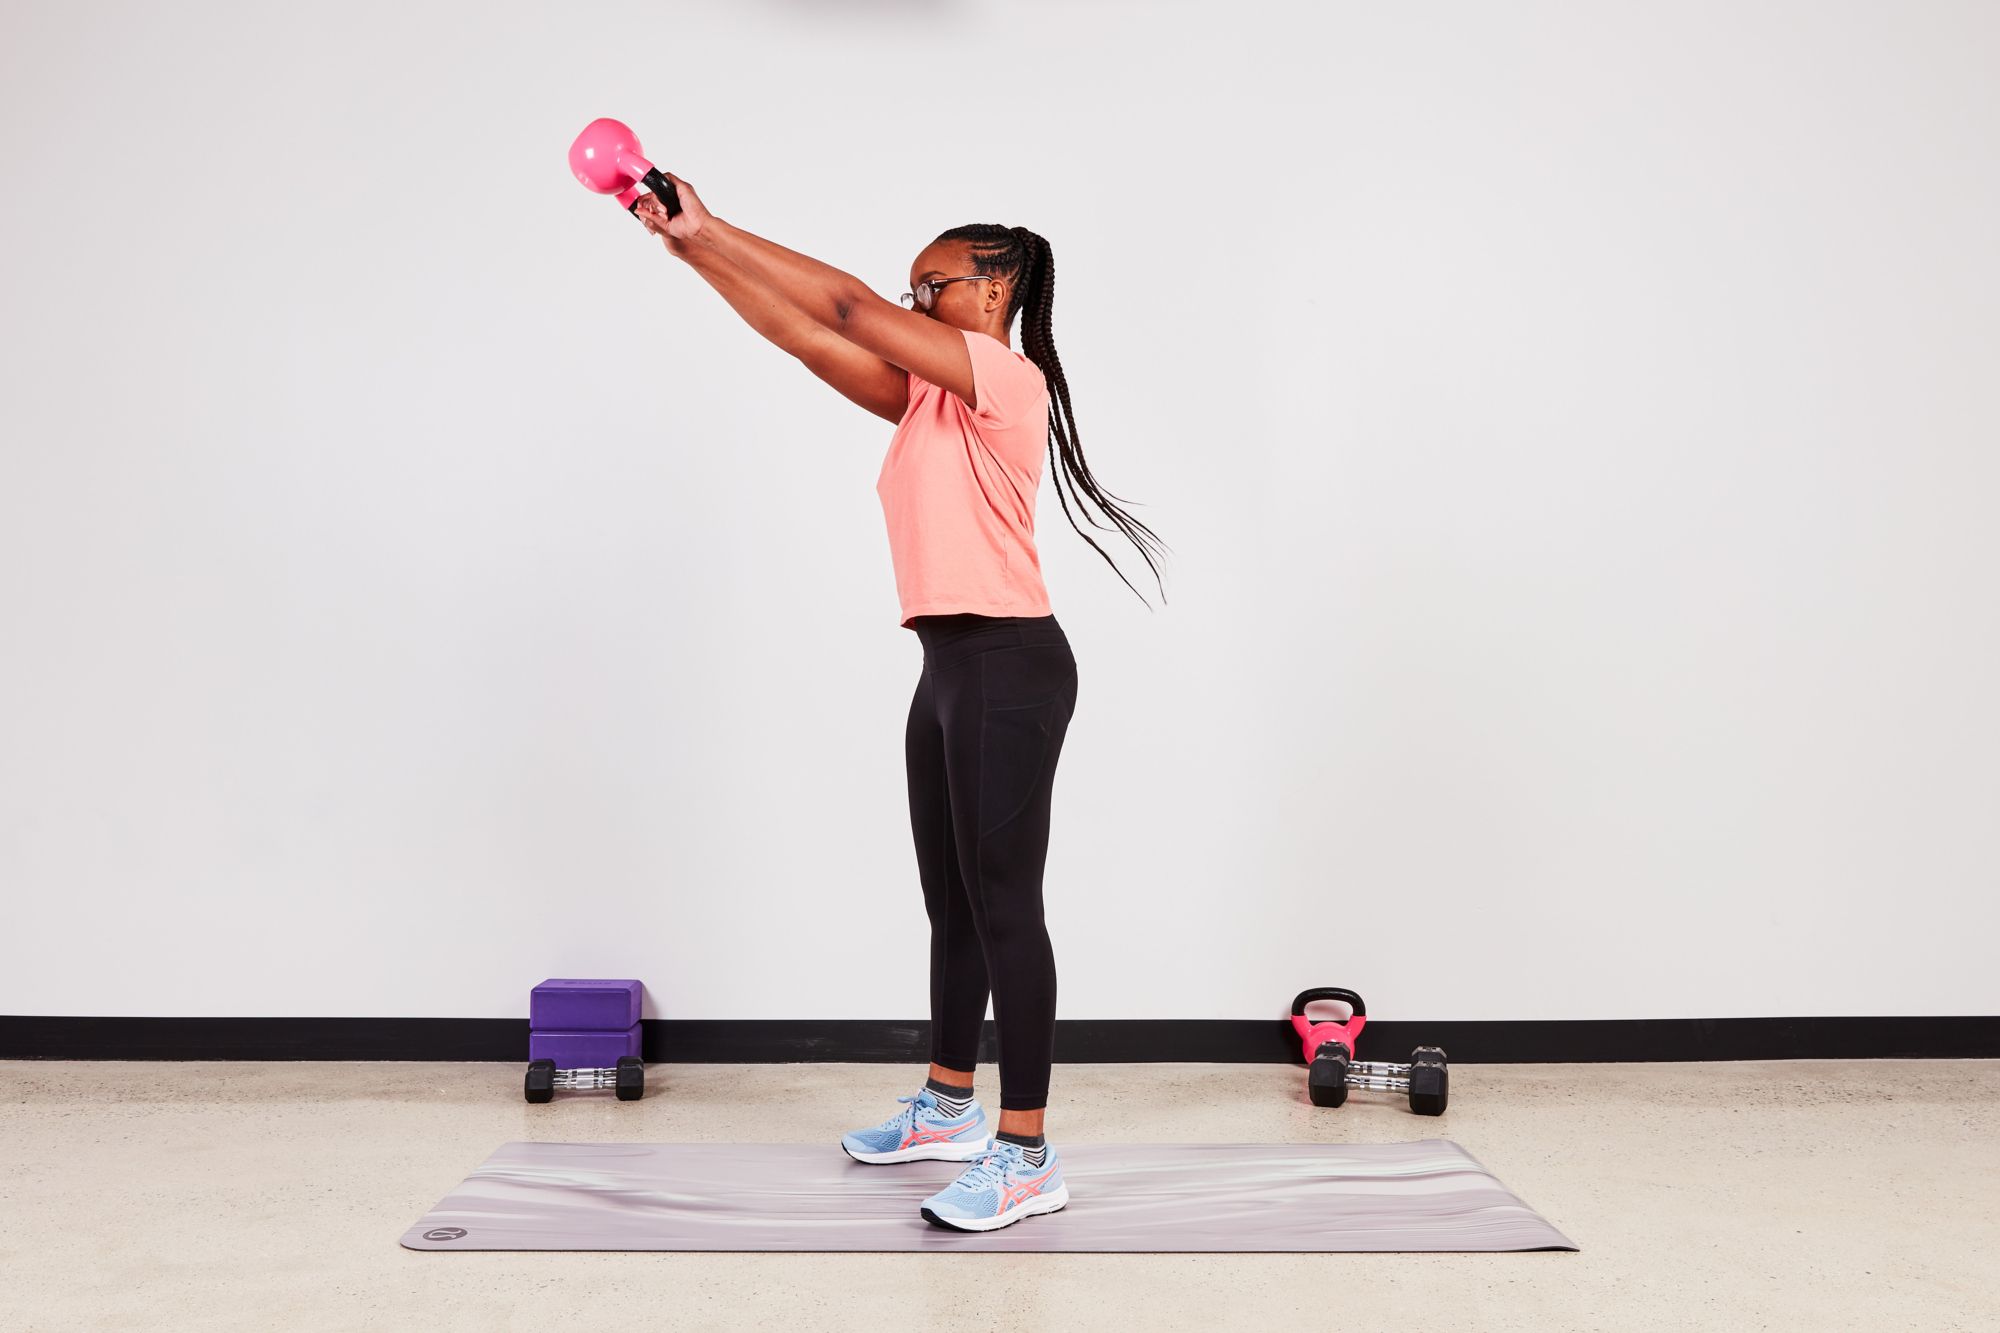 The Best Kettlebell Workouts for Strength, Muscle Mass, Beginners, and More